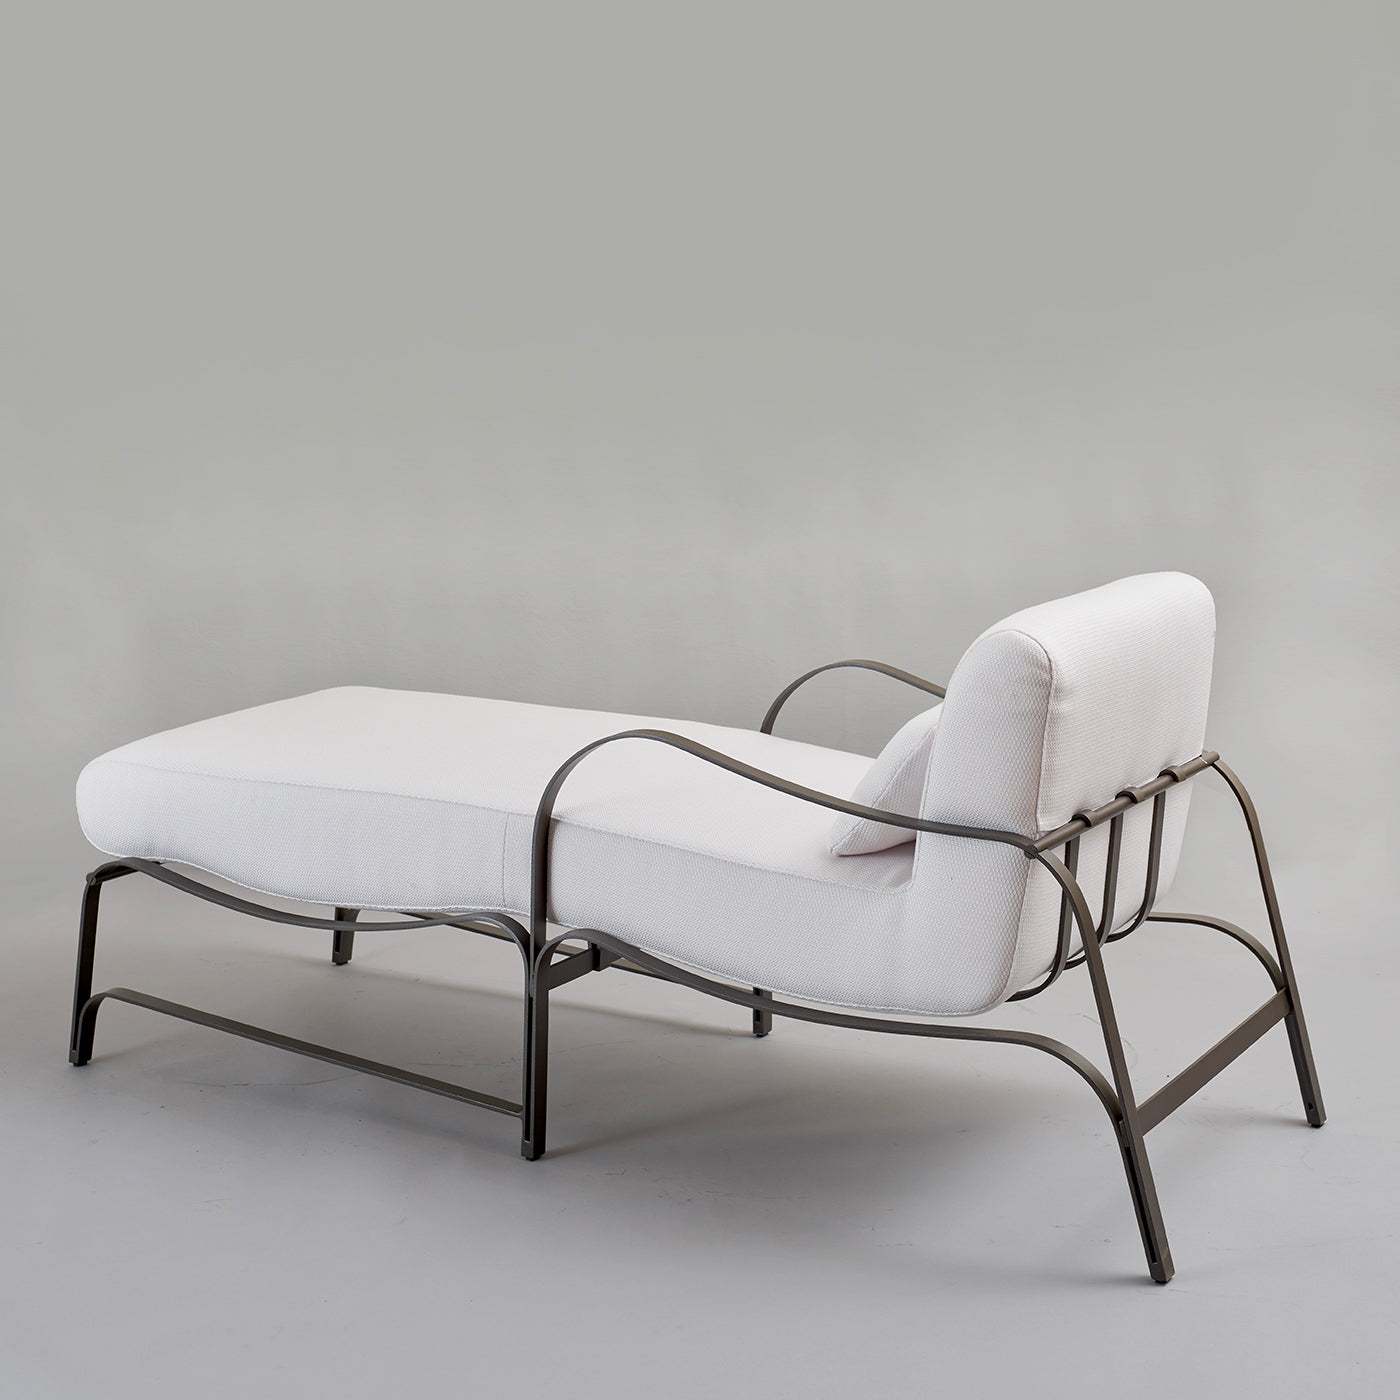 Amalfi White and Gray Chaise Longue by Studio 63 in Stainless Steel - Alternative view 2